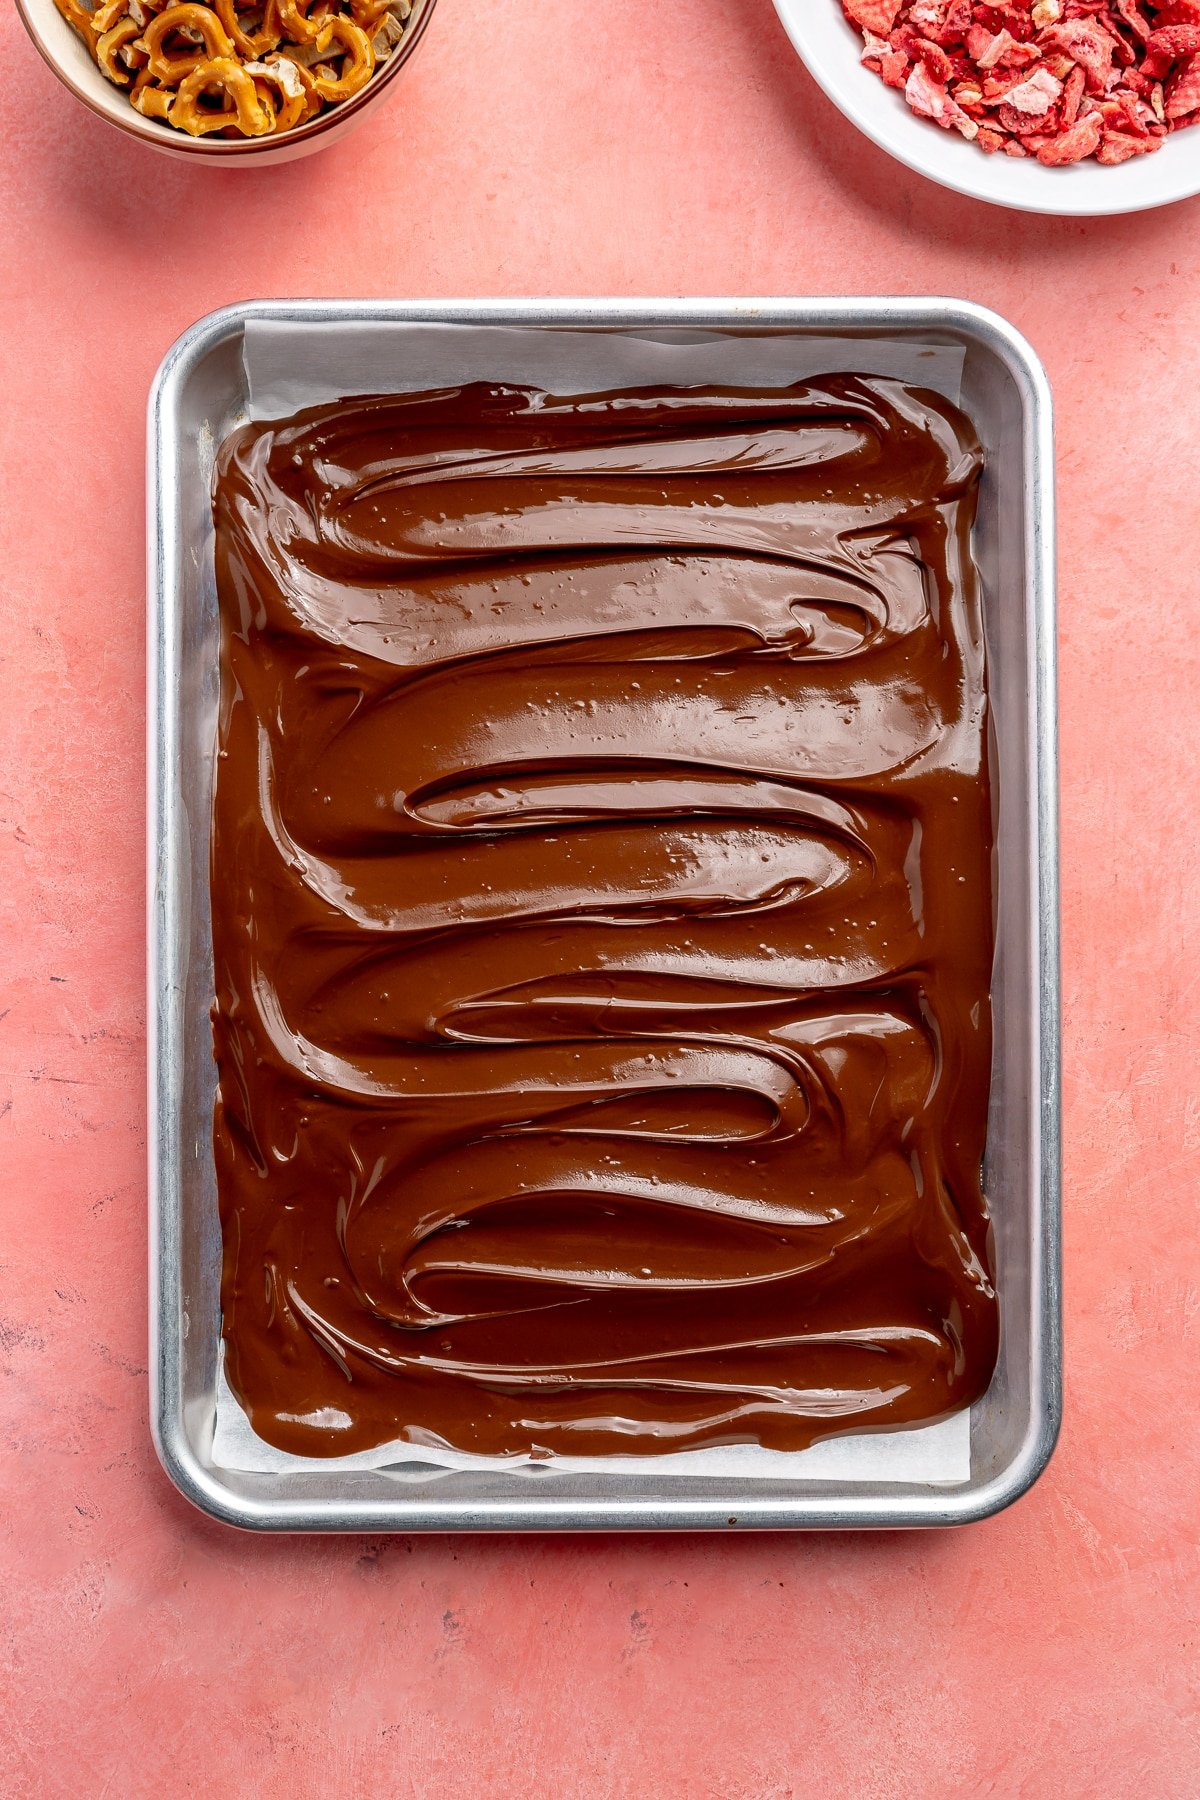 The melted chocolate has been spread into an even layer covering the bottom of the tray.